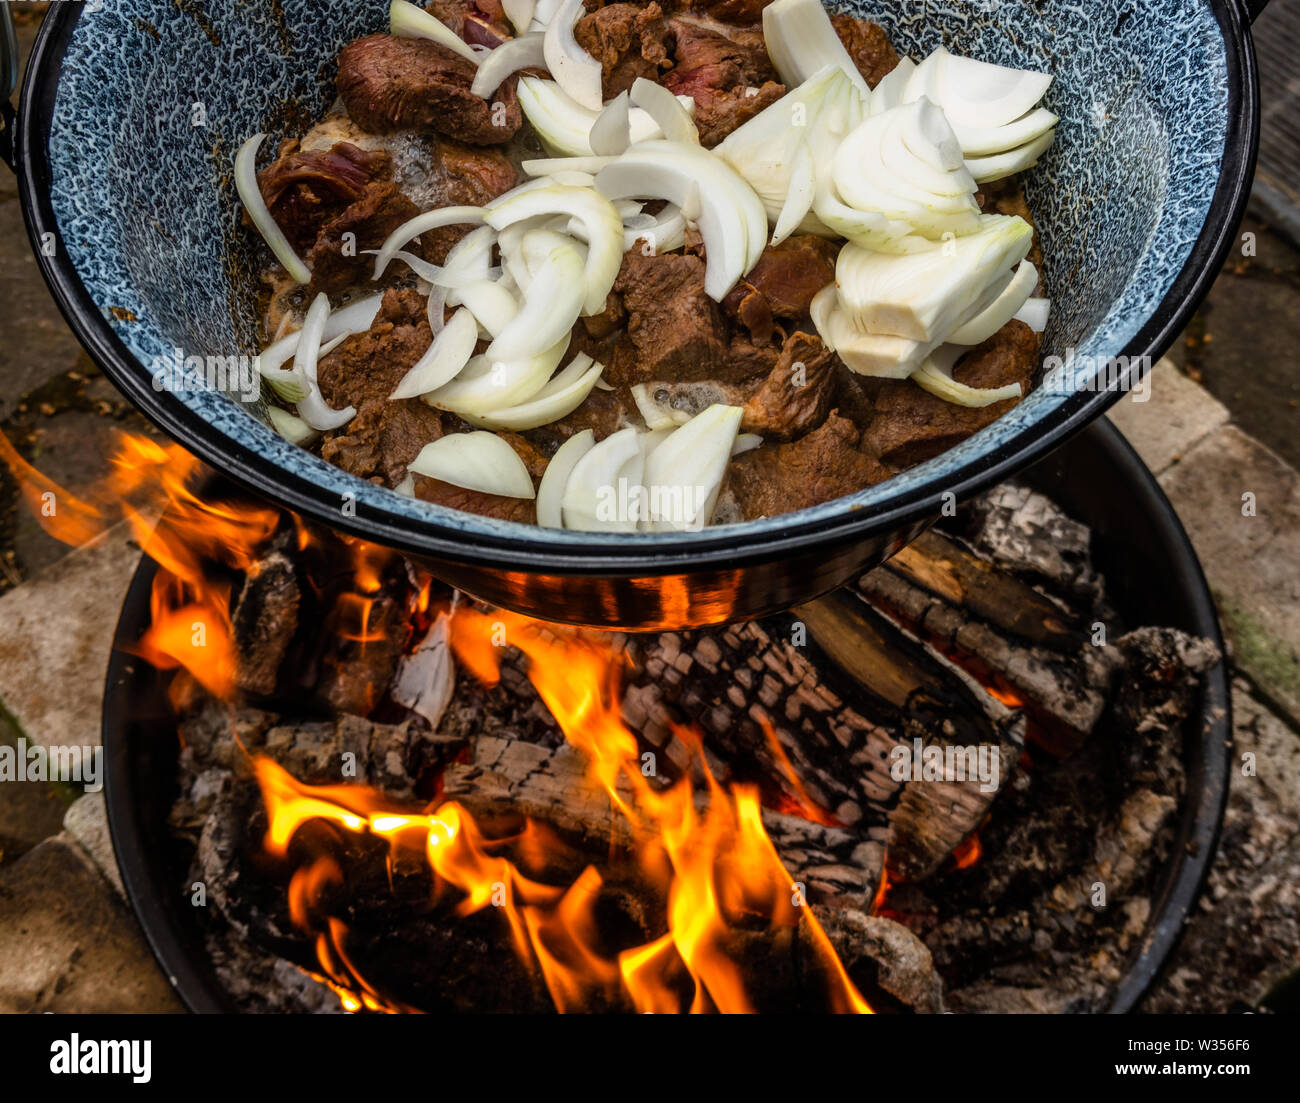 White onions and roasted pieces of beef hang in a pot over an open wood fire for the preparation of kettle goulash. Stock Photo